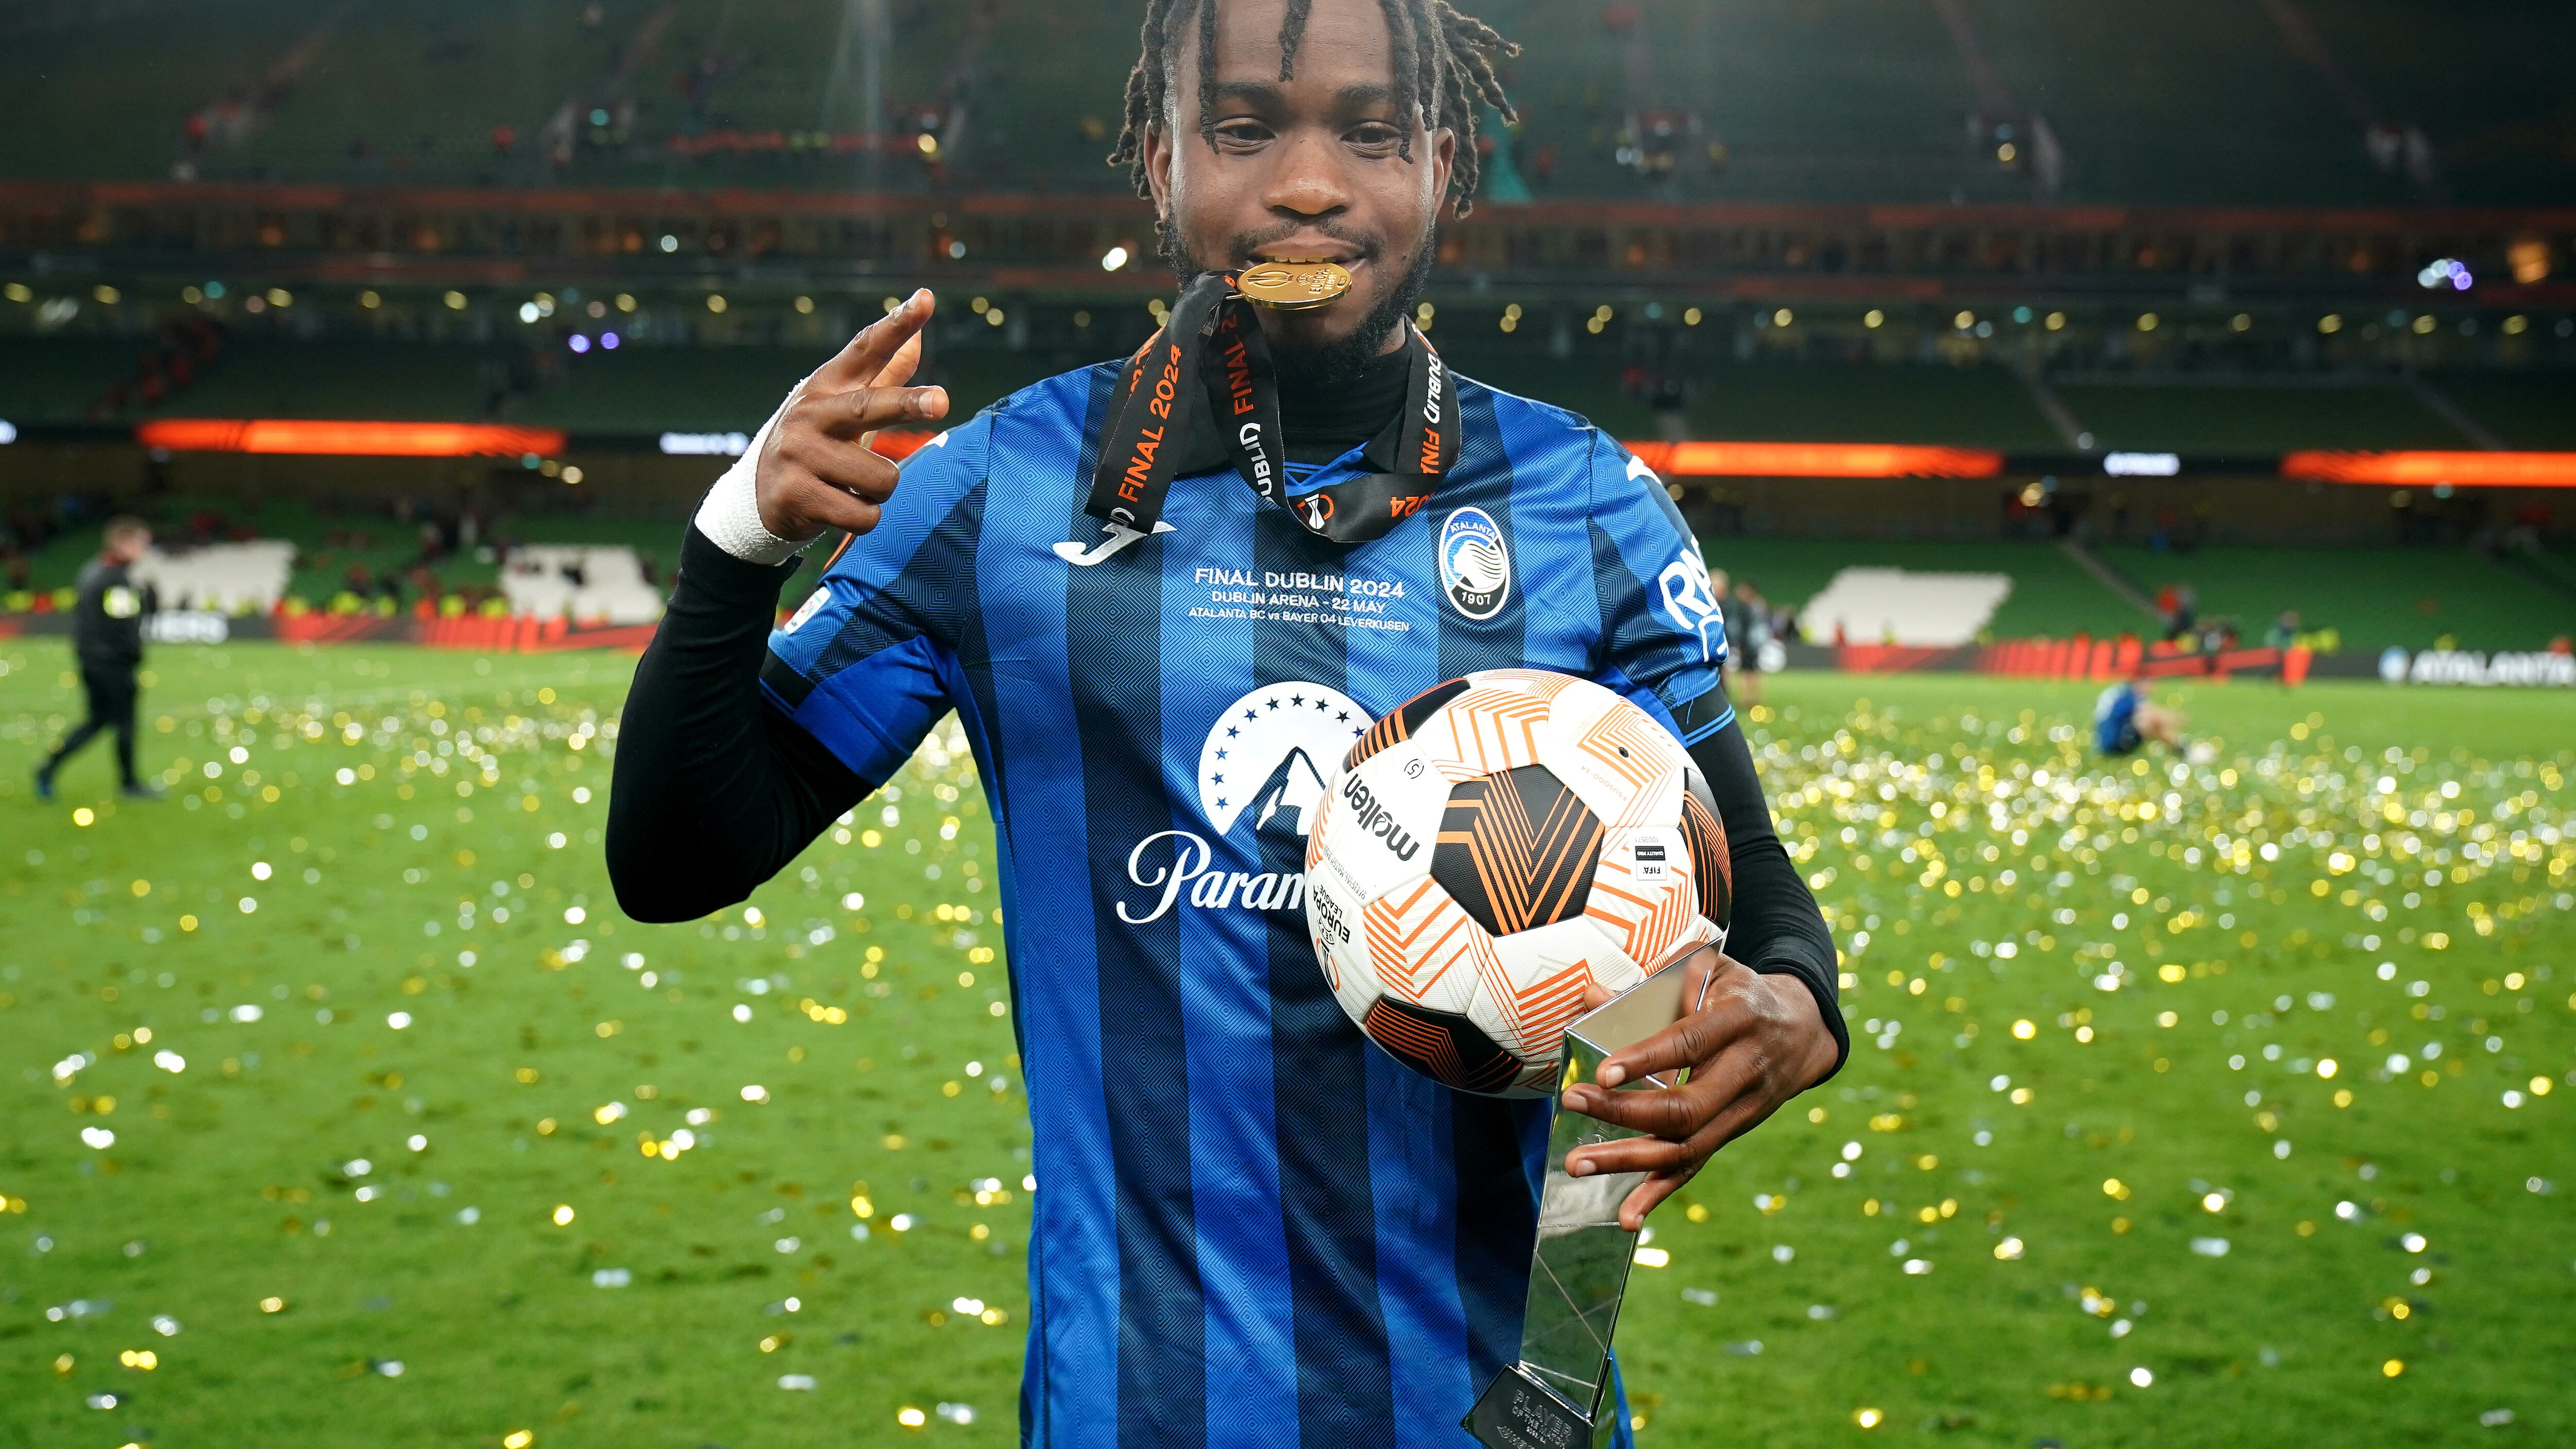 Atalanta’s Ademola Lookman celebrates with the match ball after scoring a hat-trick in the Europa League final